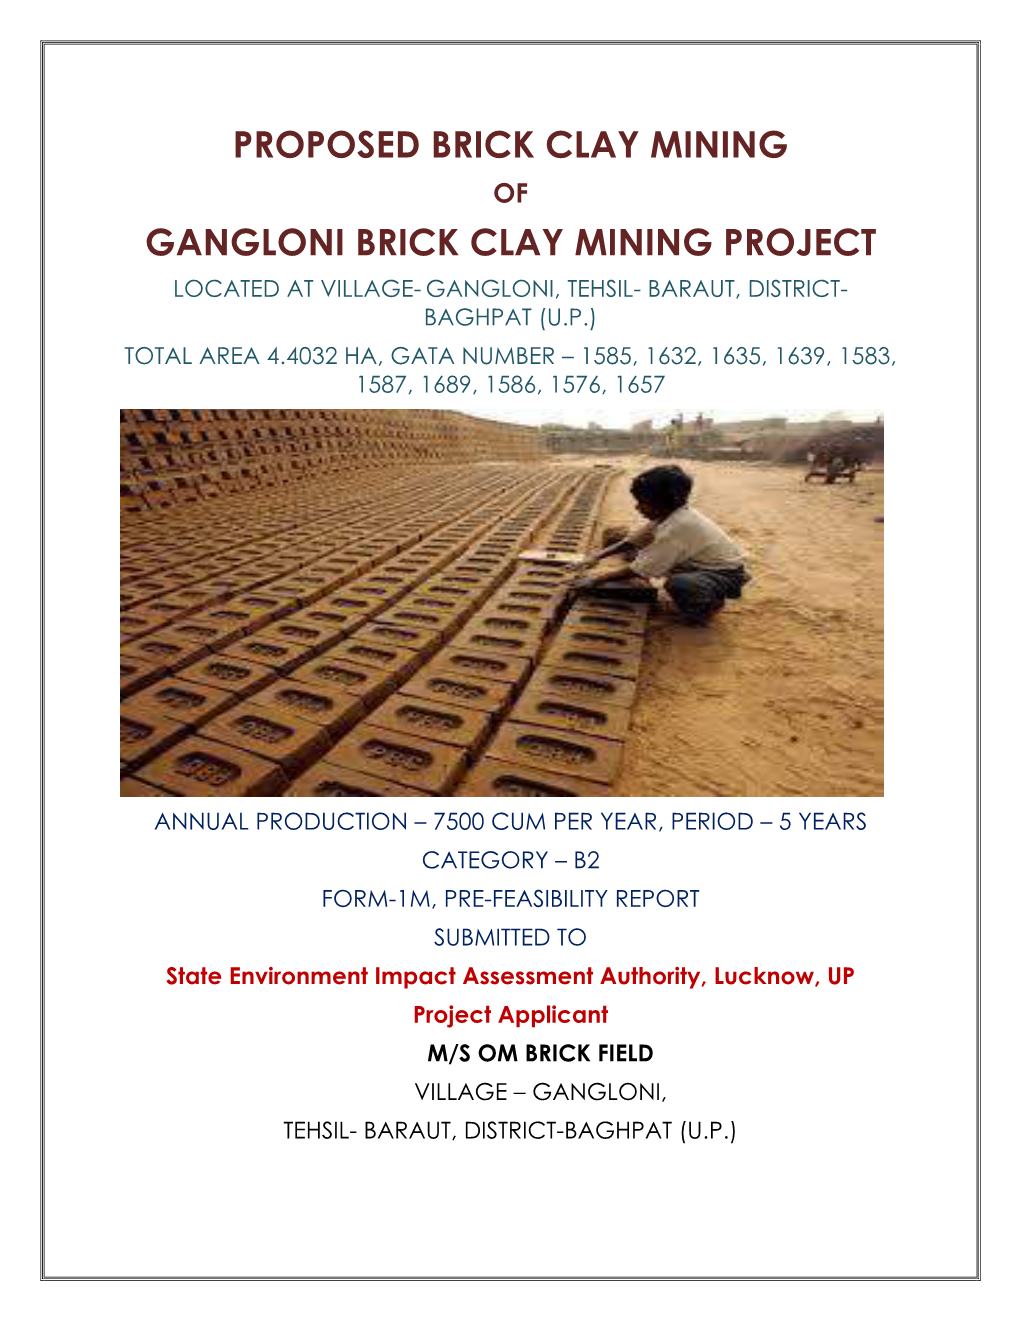 Proposed Brick Clay Mining of Gangloni Brick Clay Mining Project